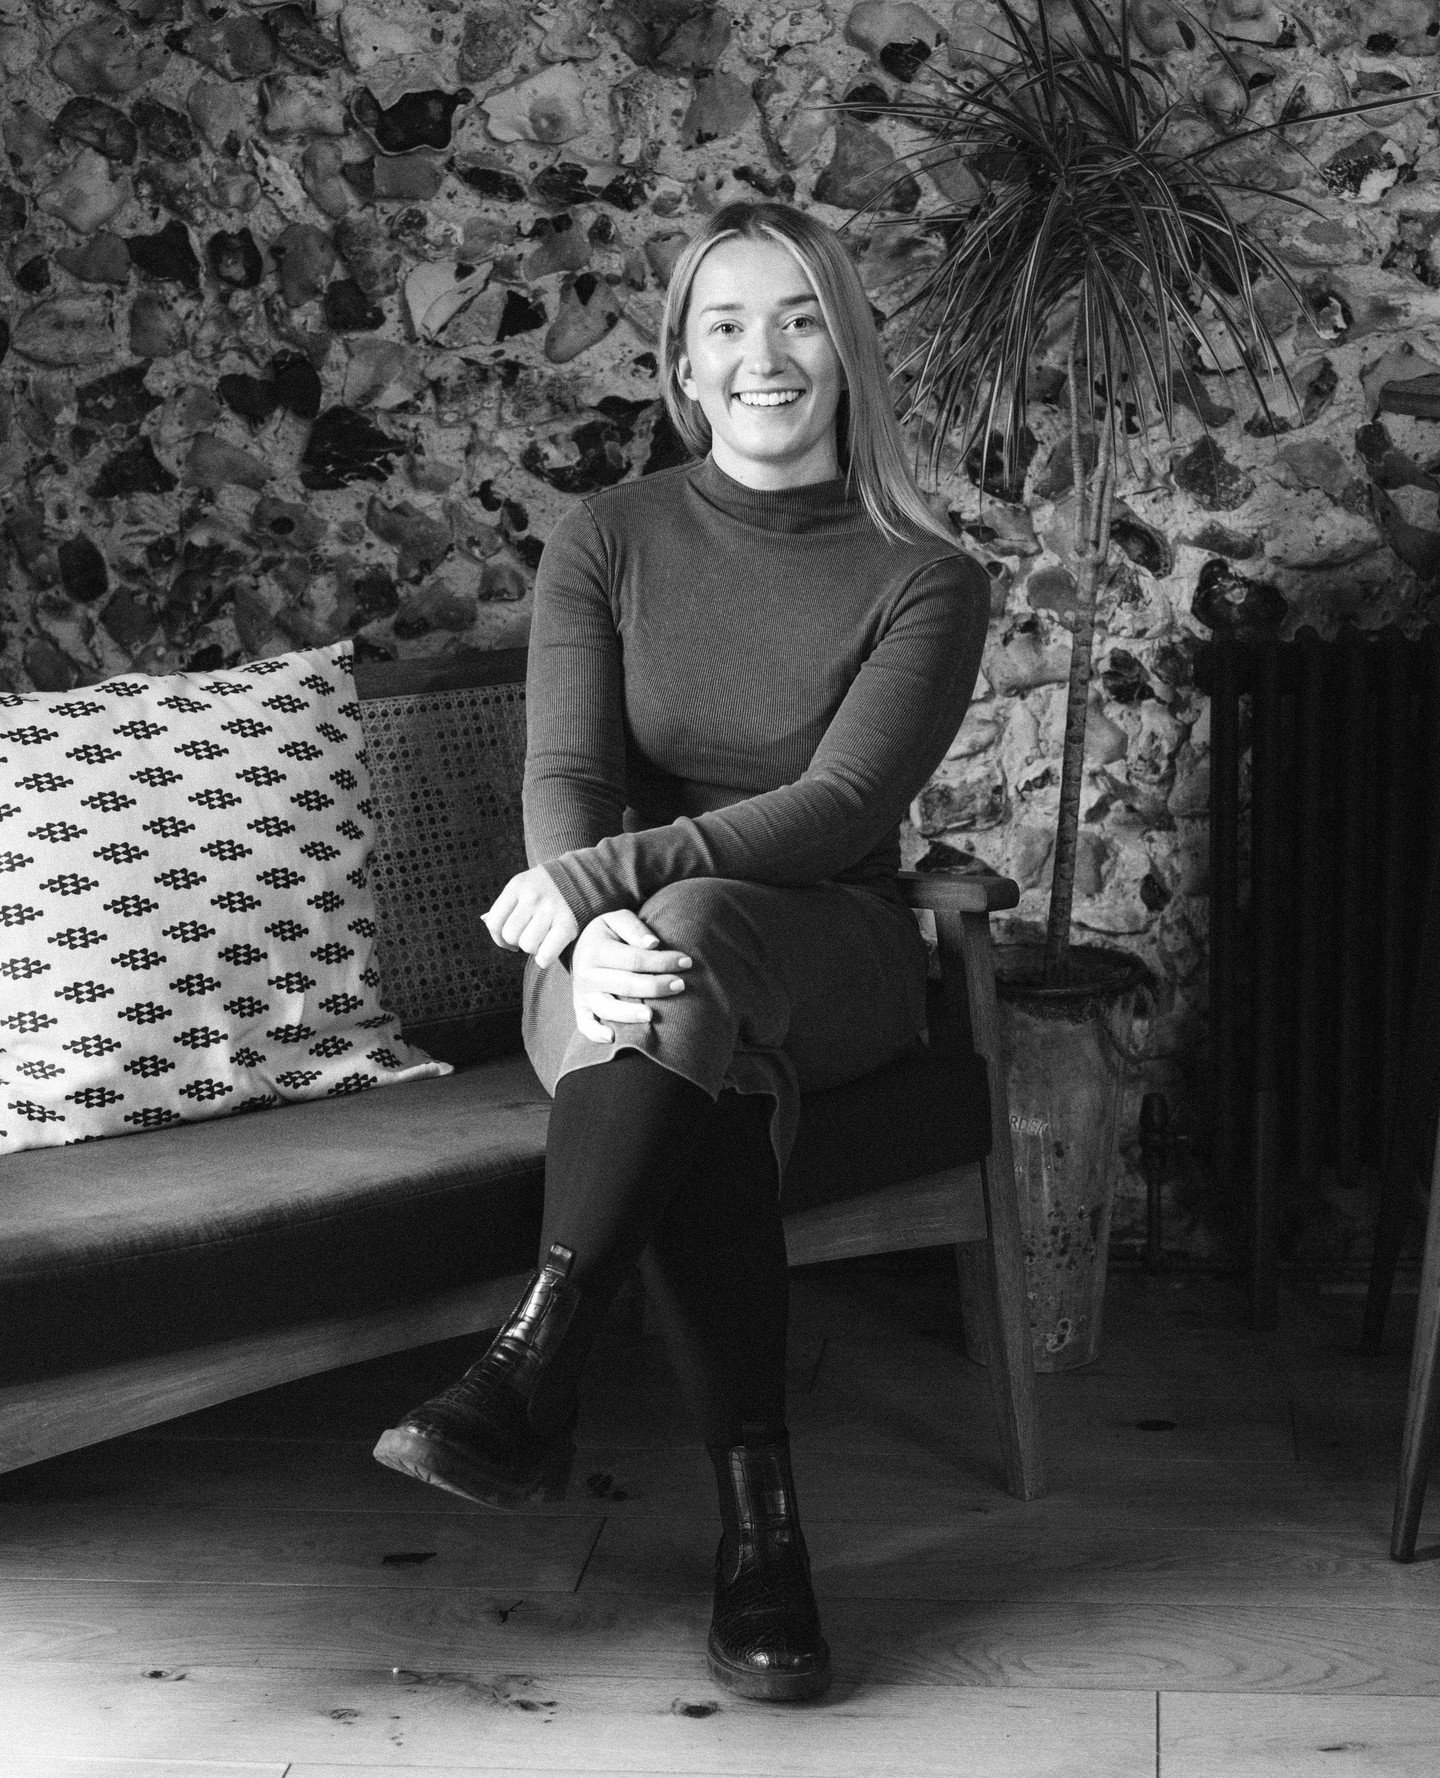 Meet Megan - Wedding &amp; Events Manager here at The Granary Estates.⁠
⁠
We asked Megan a series of questions, so lets get to know her ⬇ ⁠
⁠
What is your favourite part of The Granary Estates?⁠
&quot;I absolutely love the courtyard area, I feel like